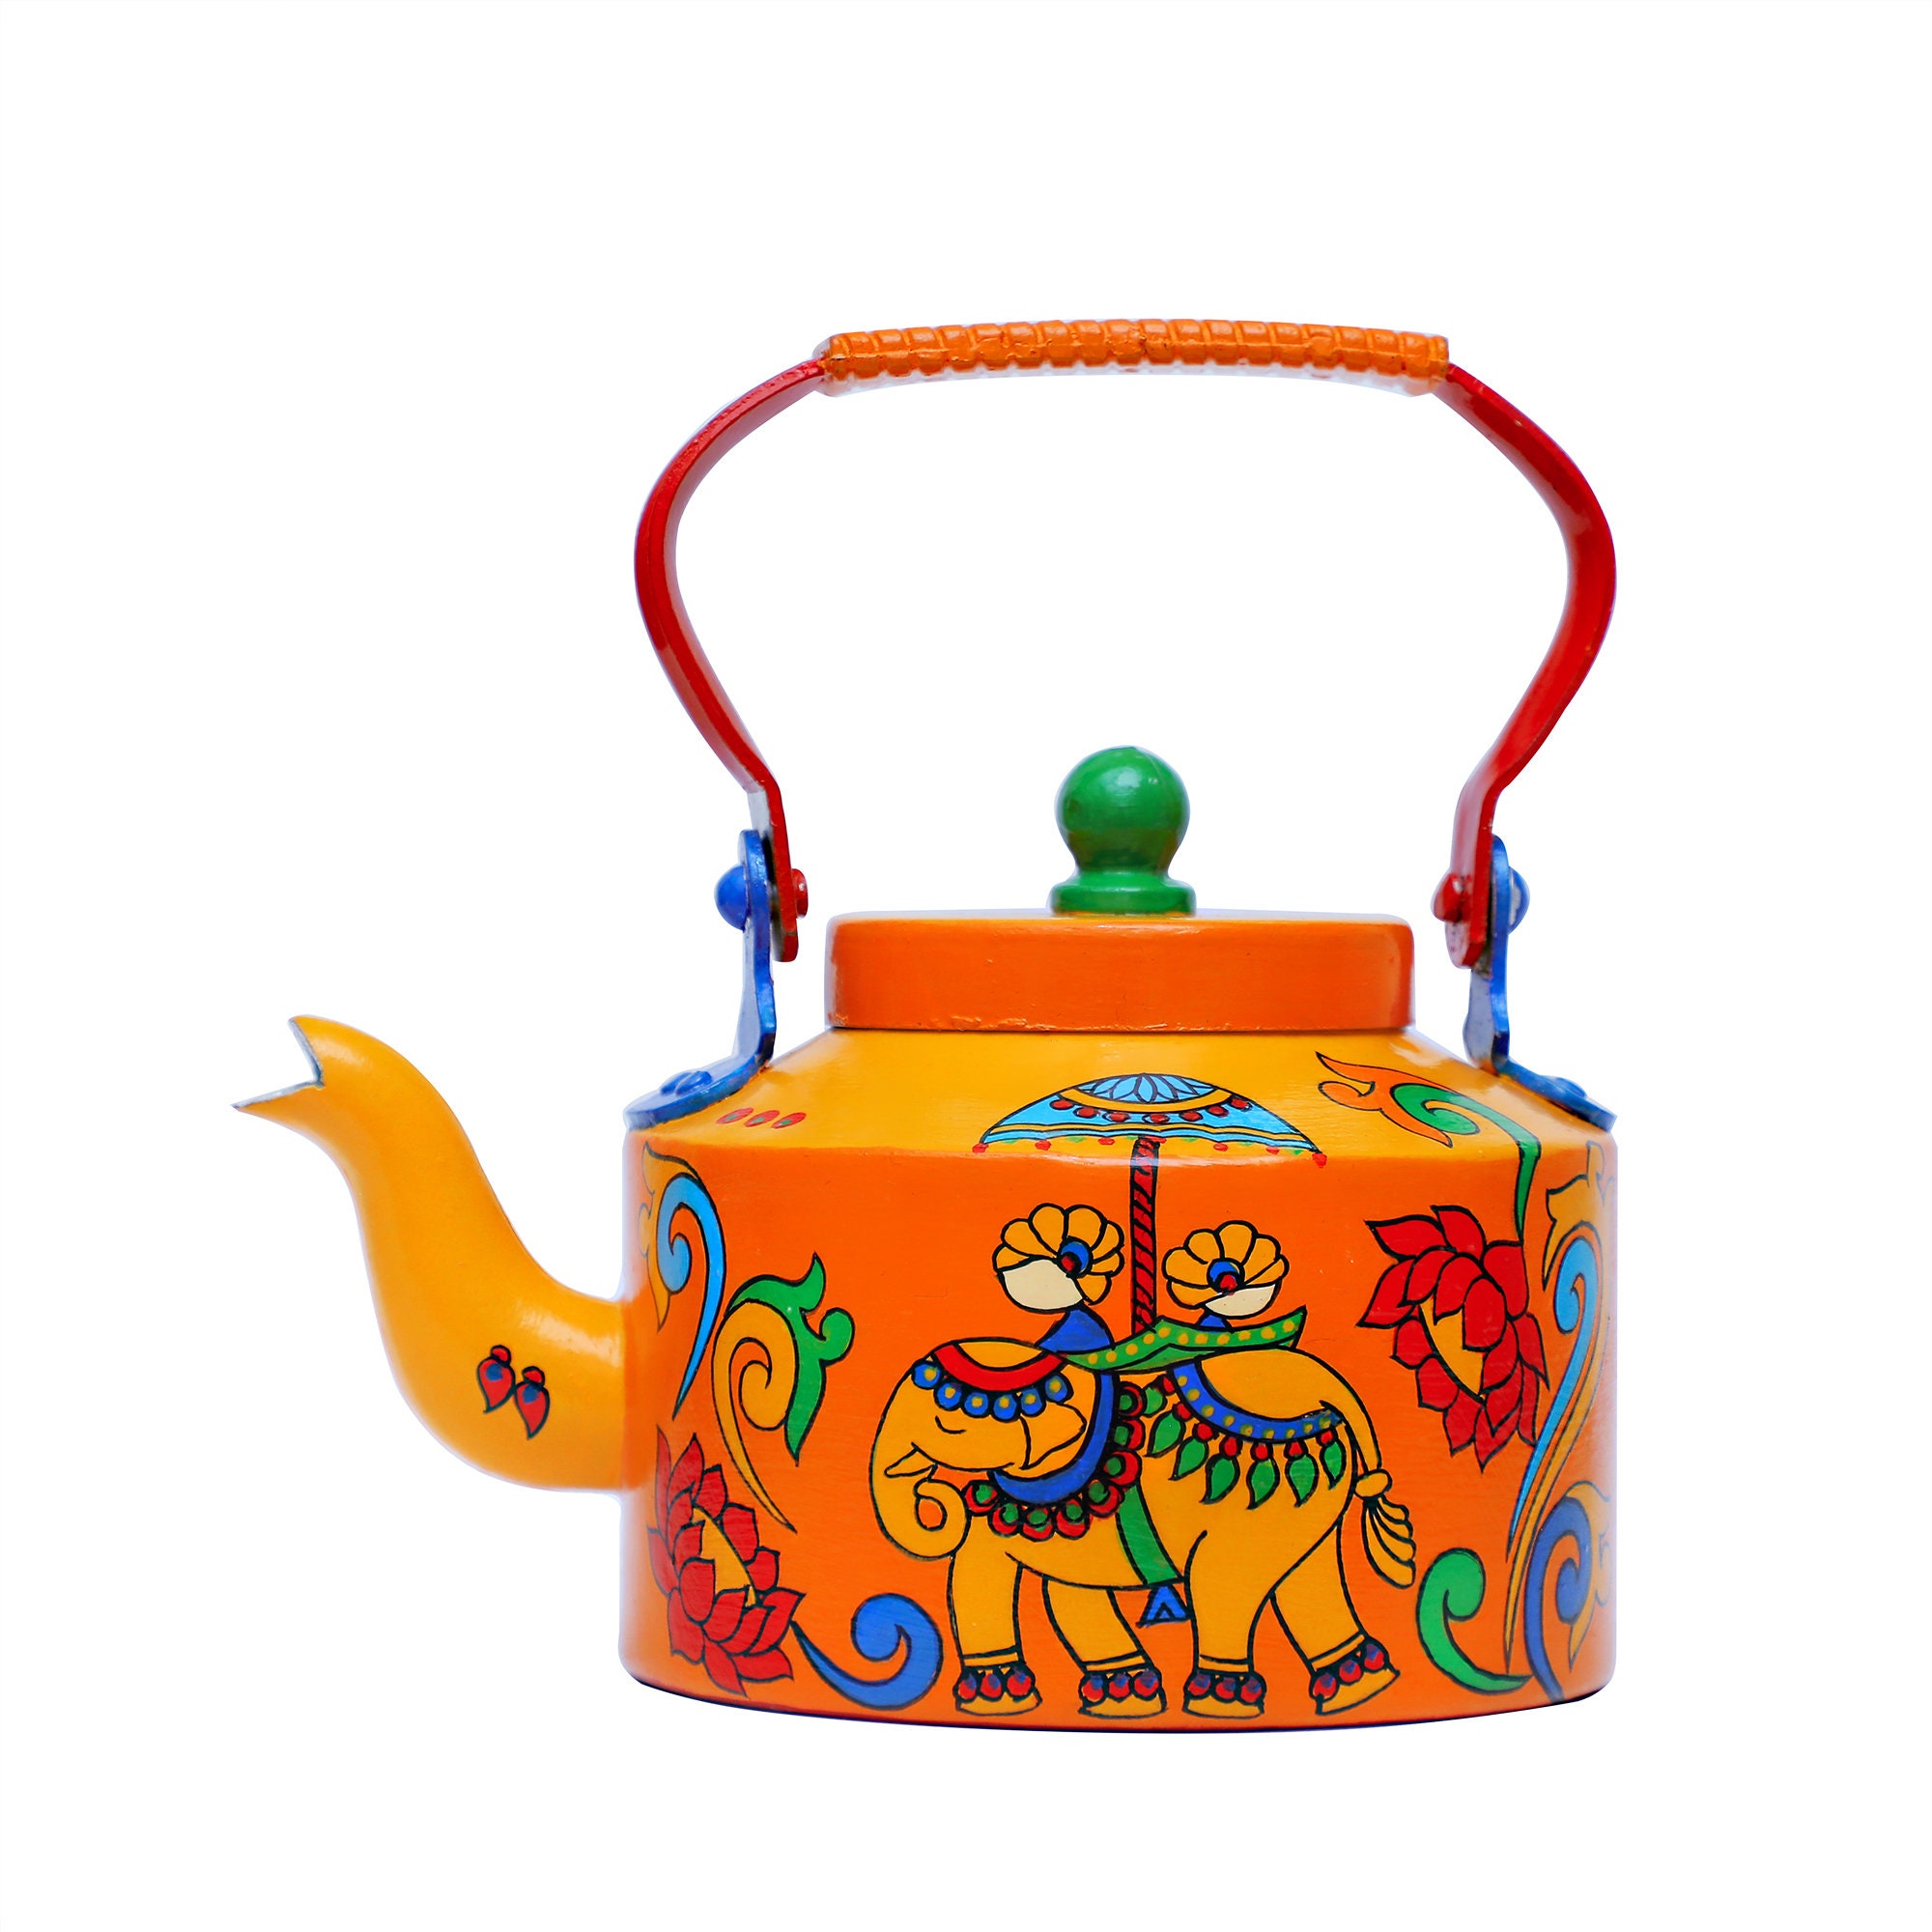 Hand Painted Tea Kettle : Pink City, Festive Gift, Gift for Her